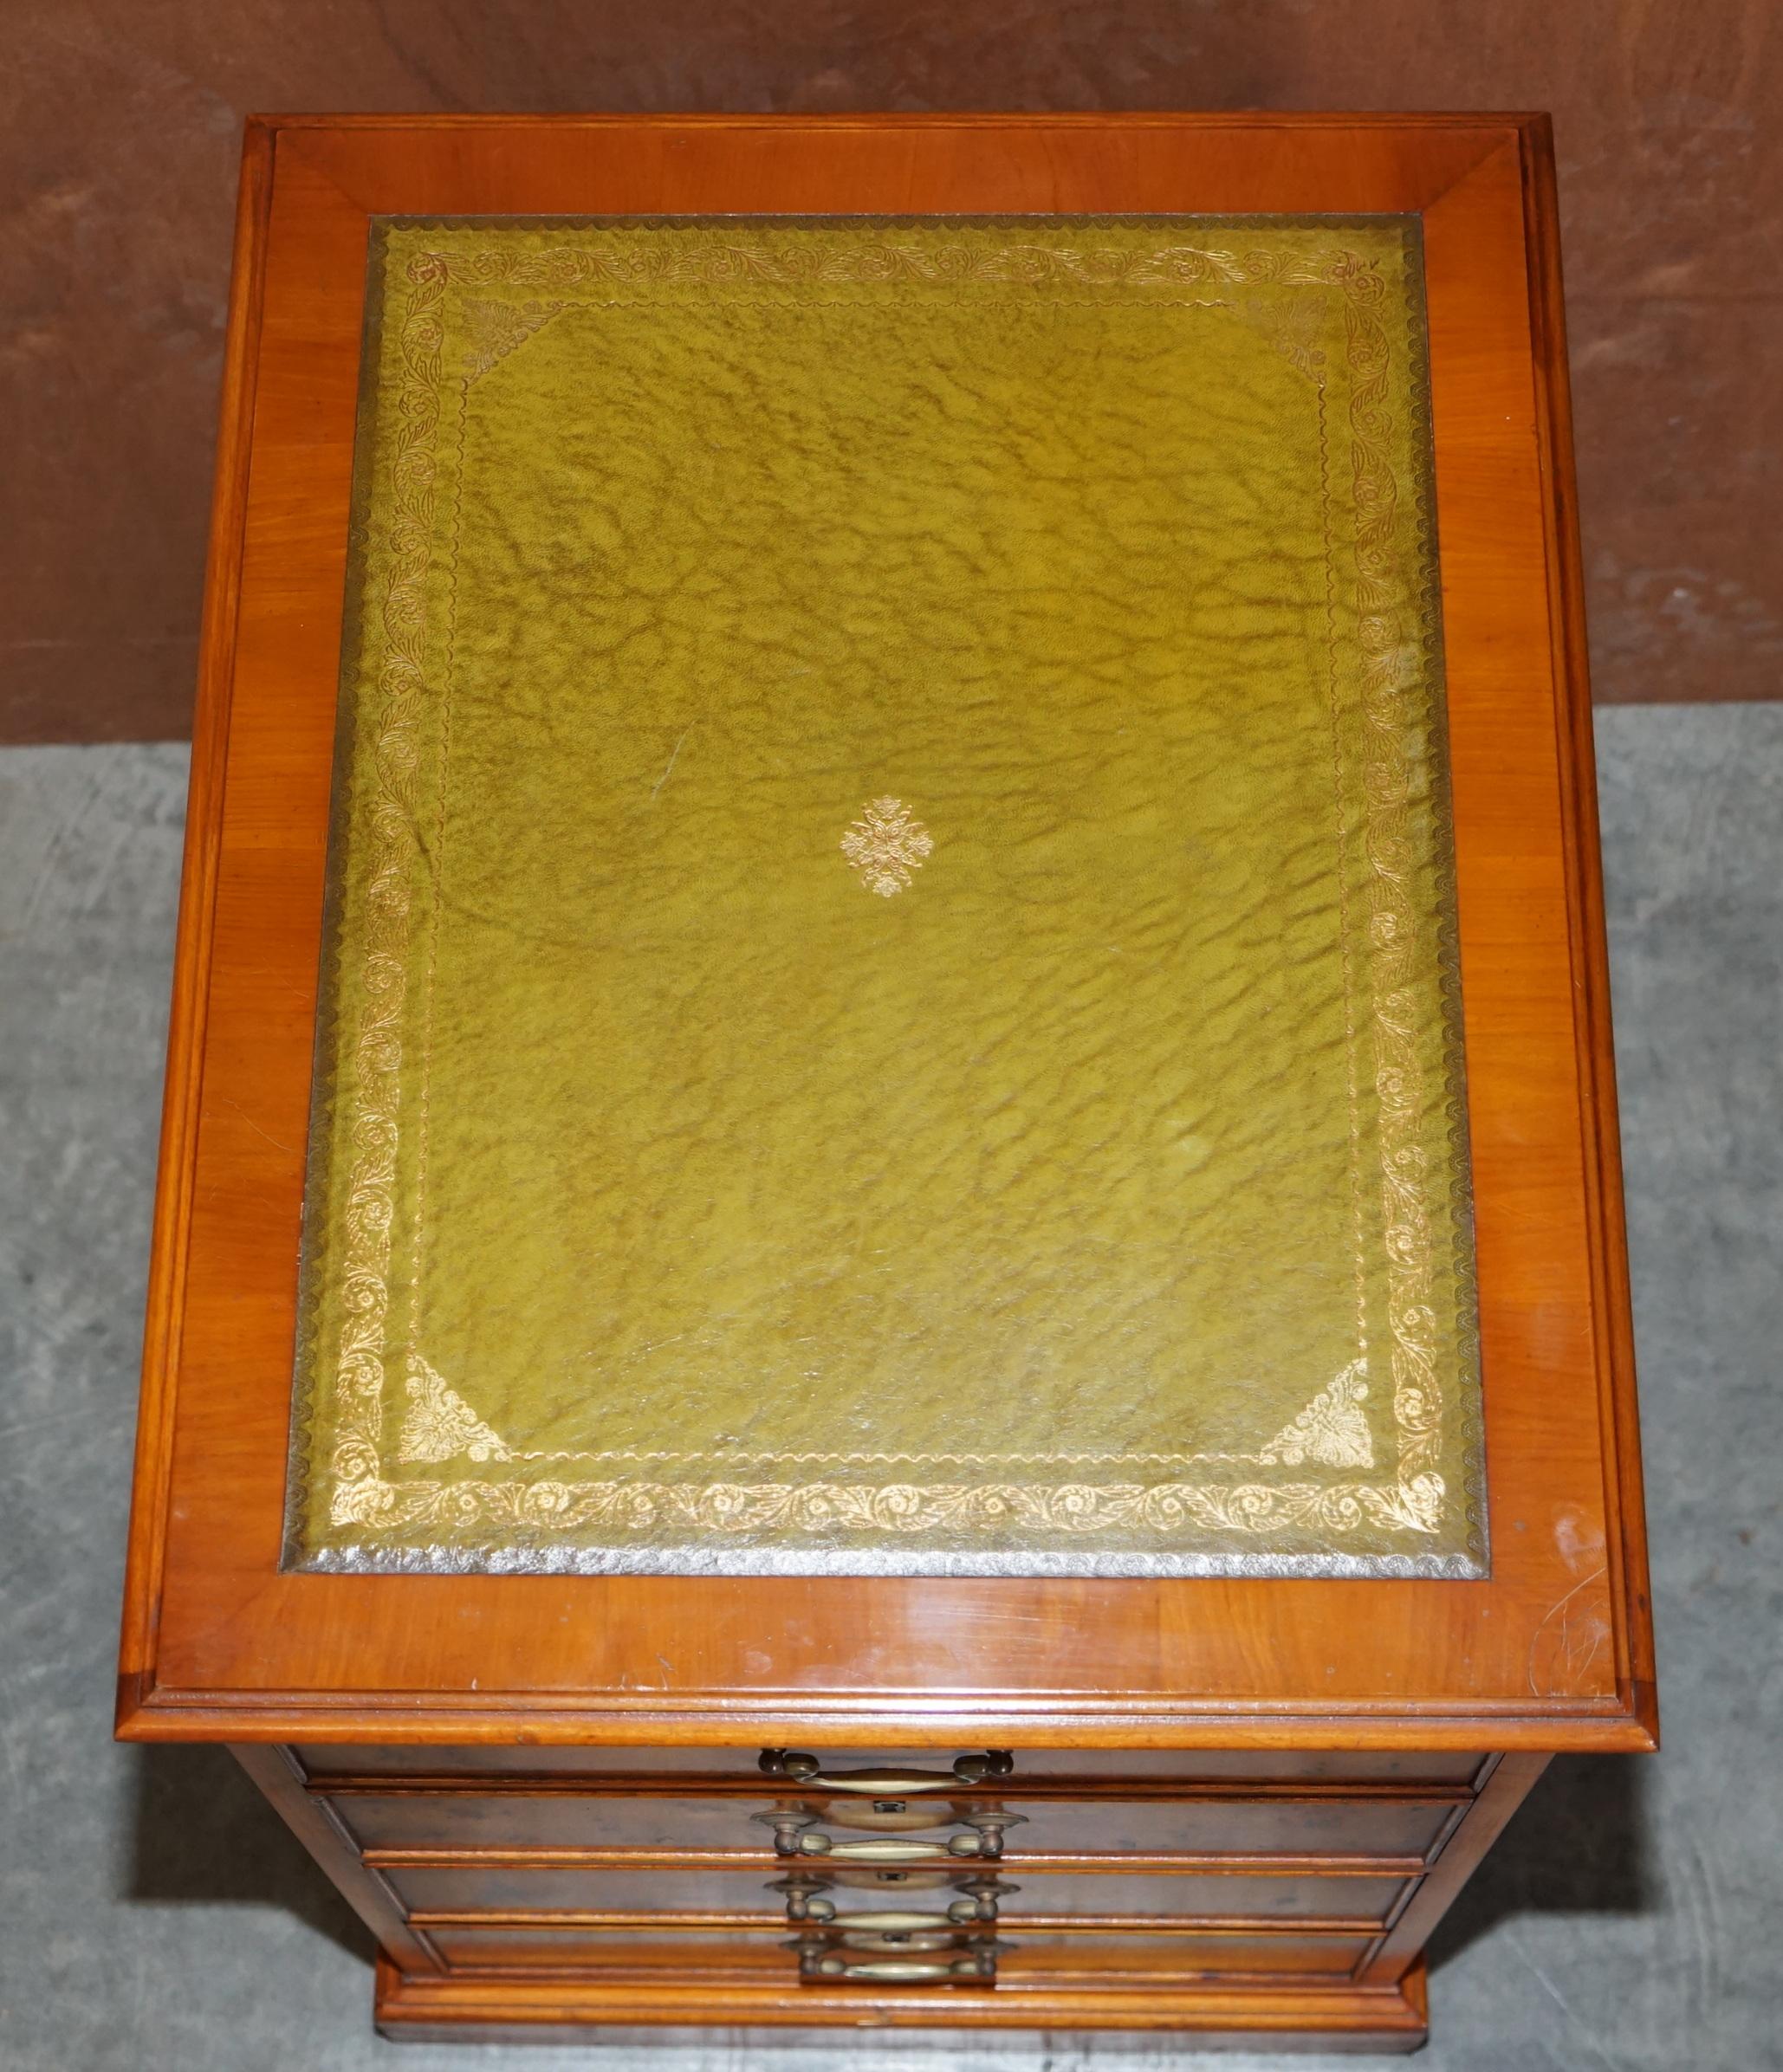 Hand-Crafted Burr Yew Wood Office Filing Cabinet with Nice Green Leather Top